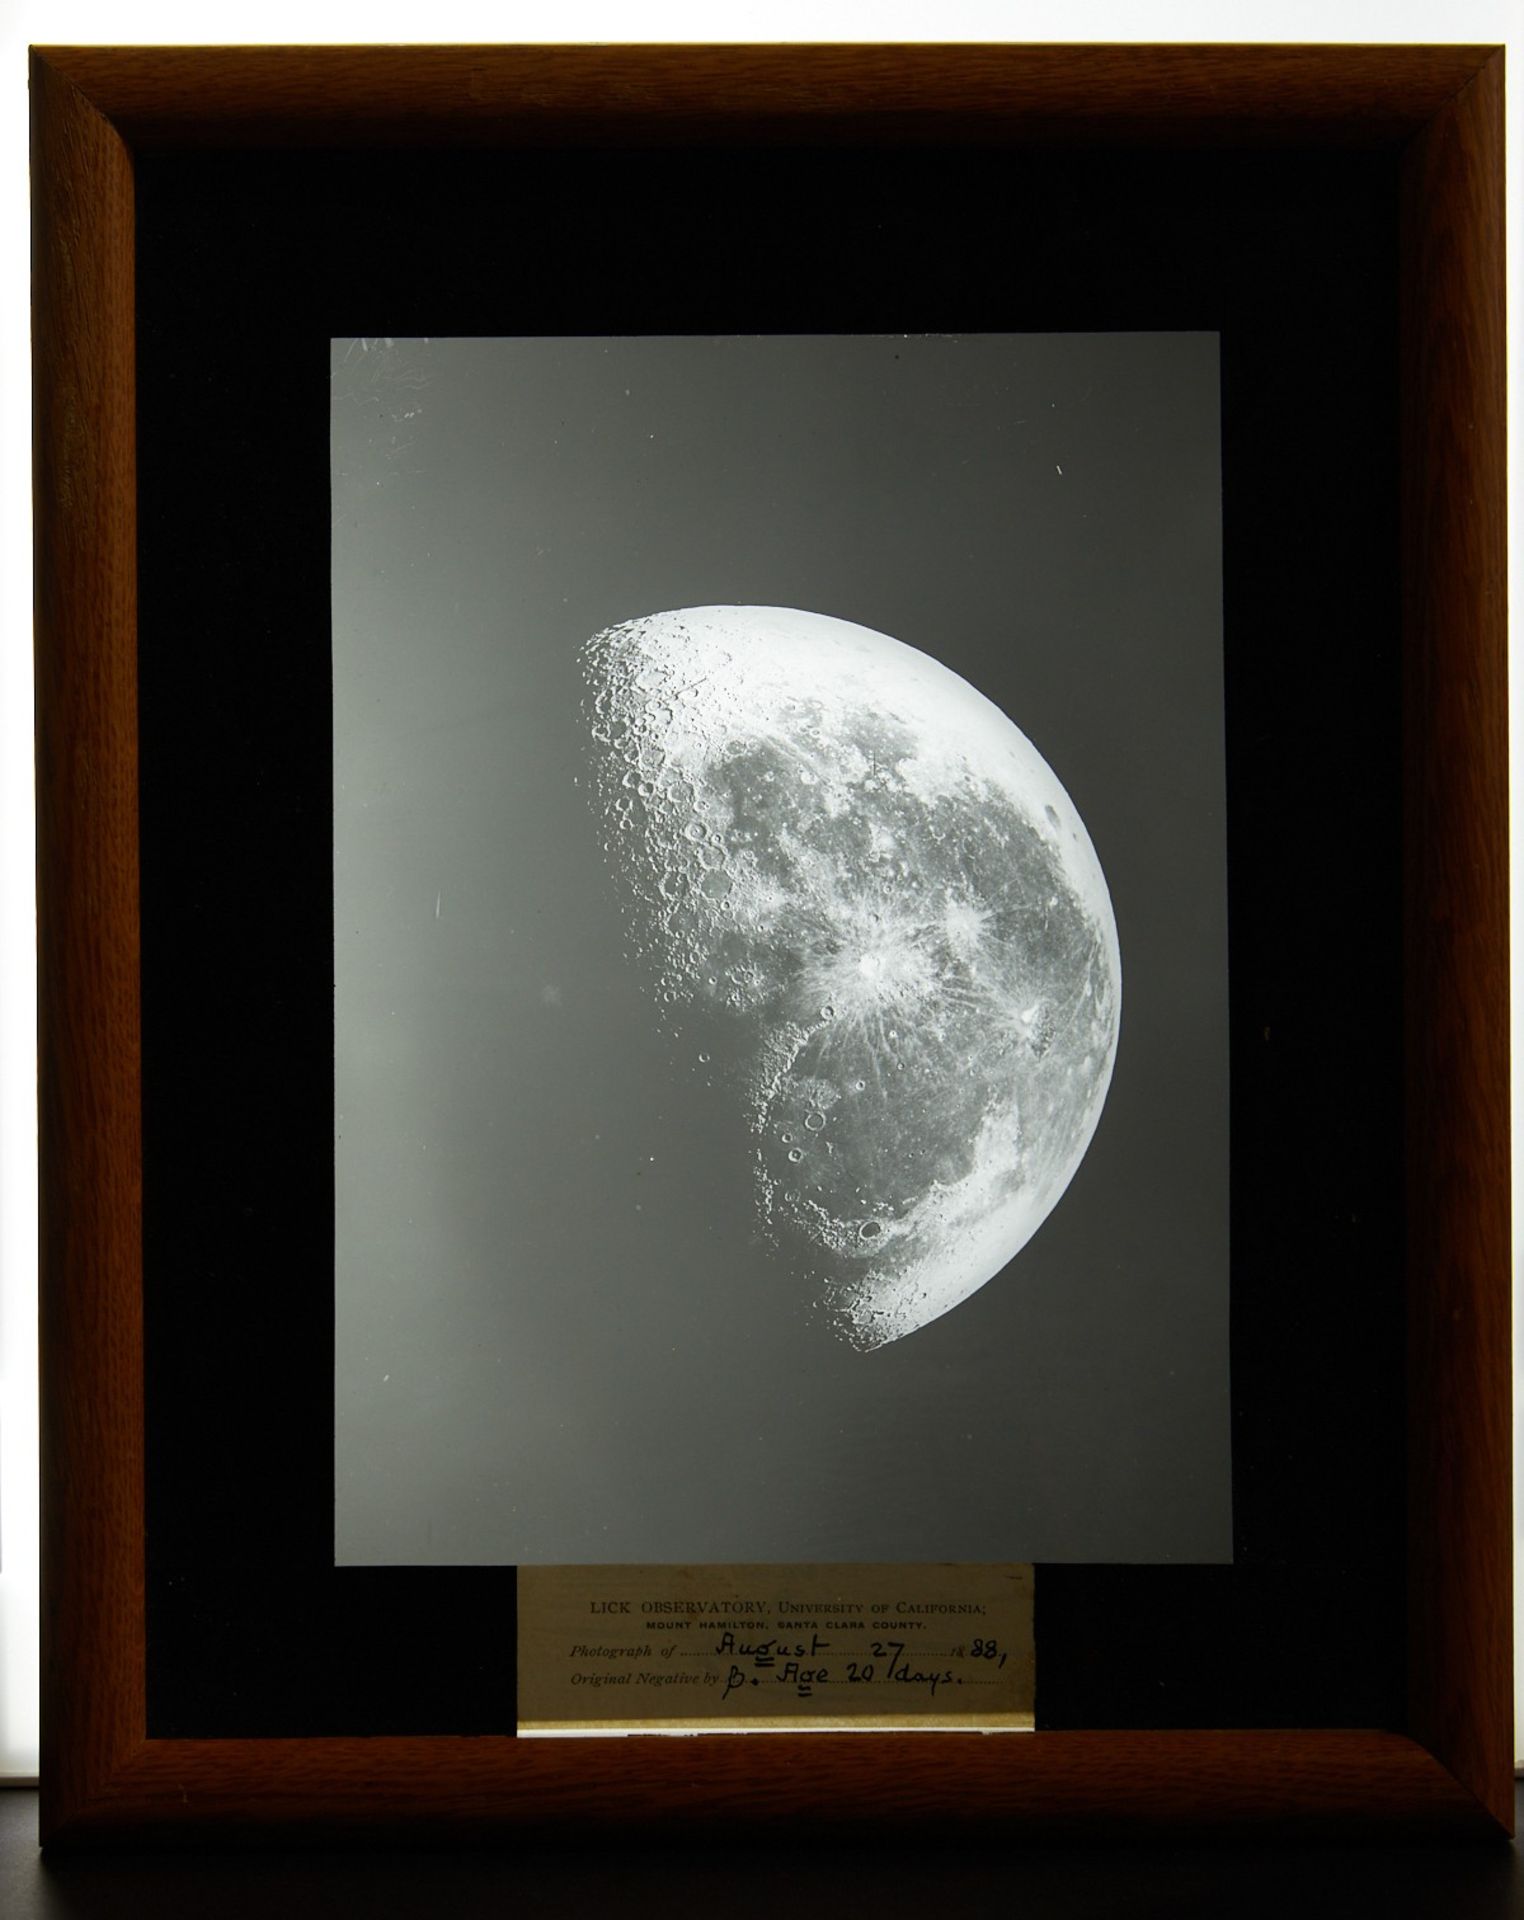 Early Glass Plate Positive Moon Photograph at Lick Observatory 1888 - Bild 2 aus 3